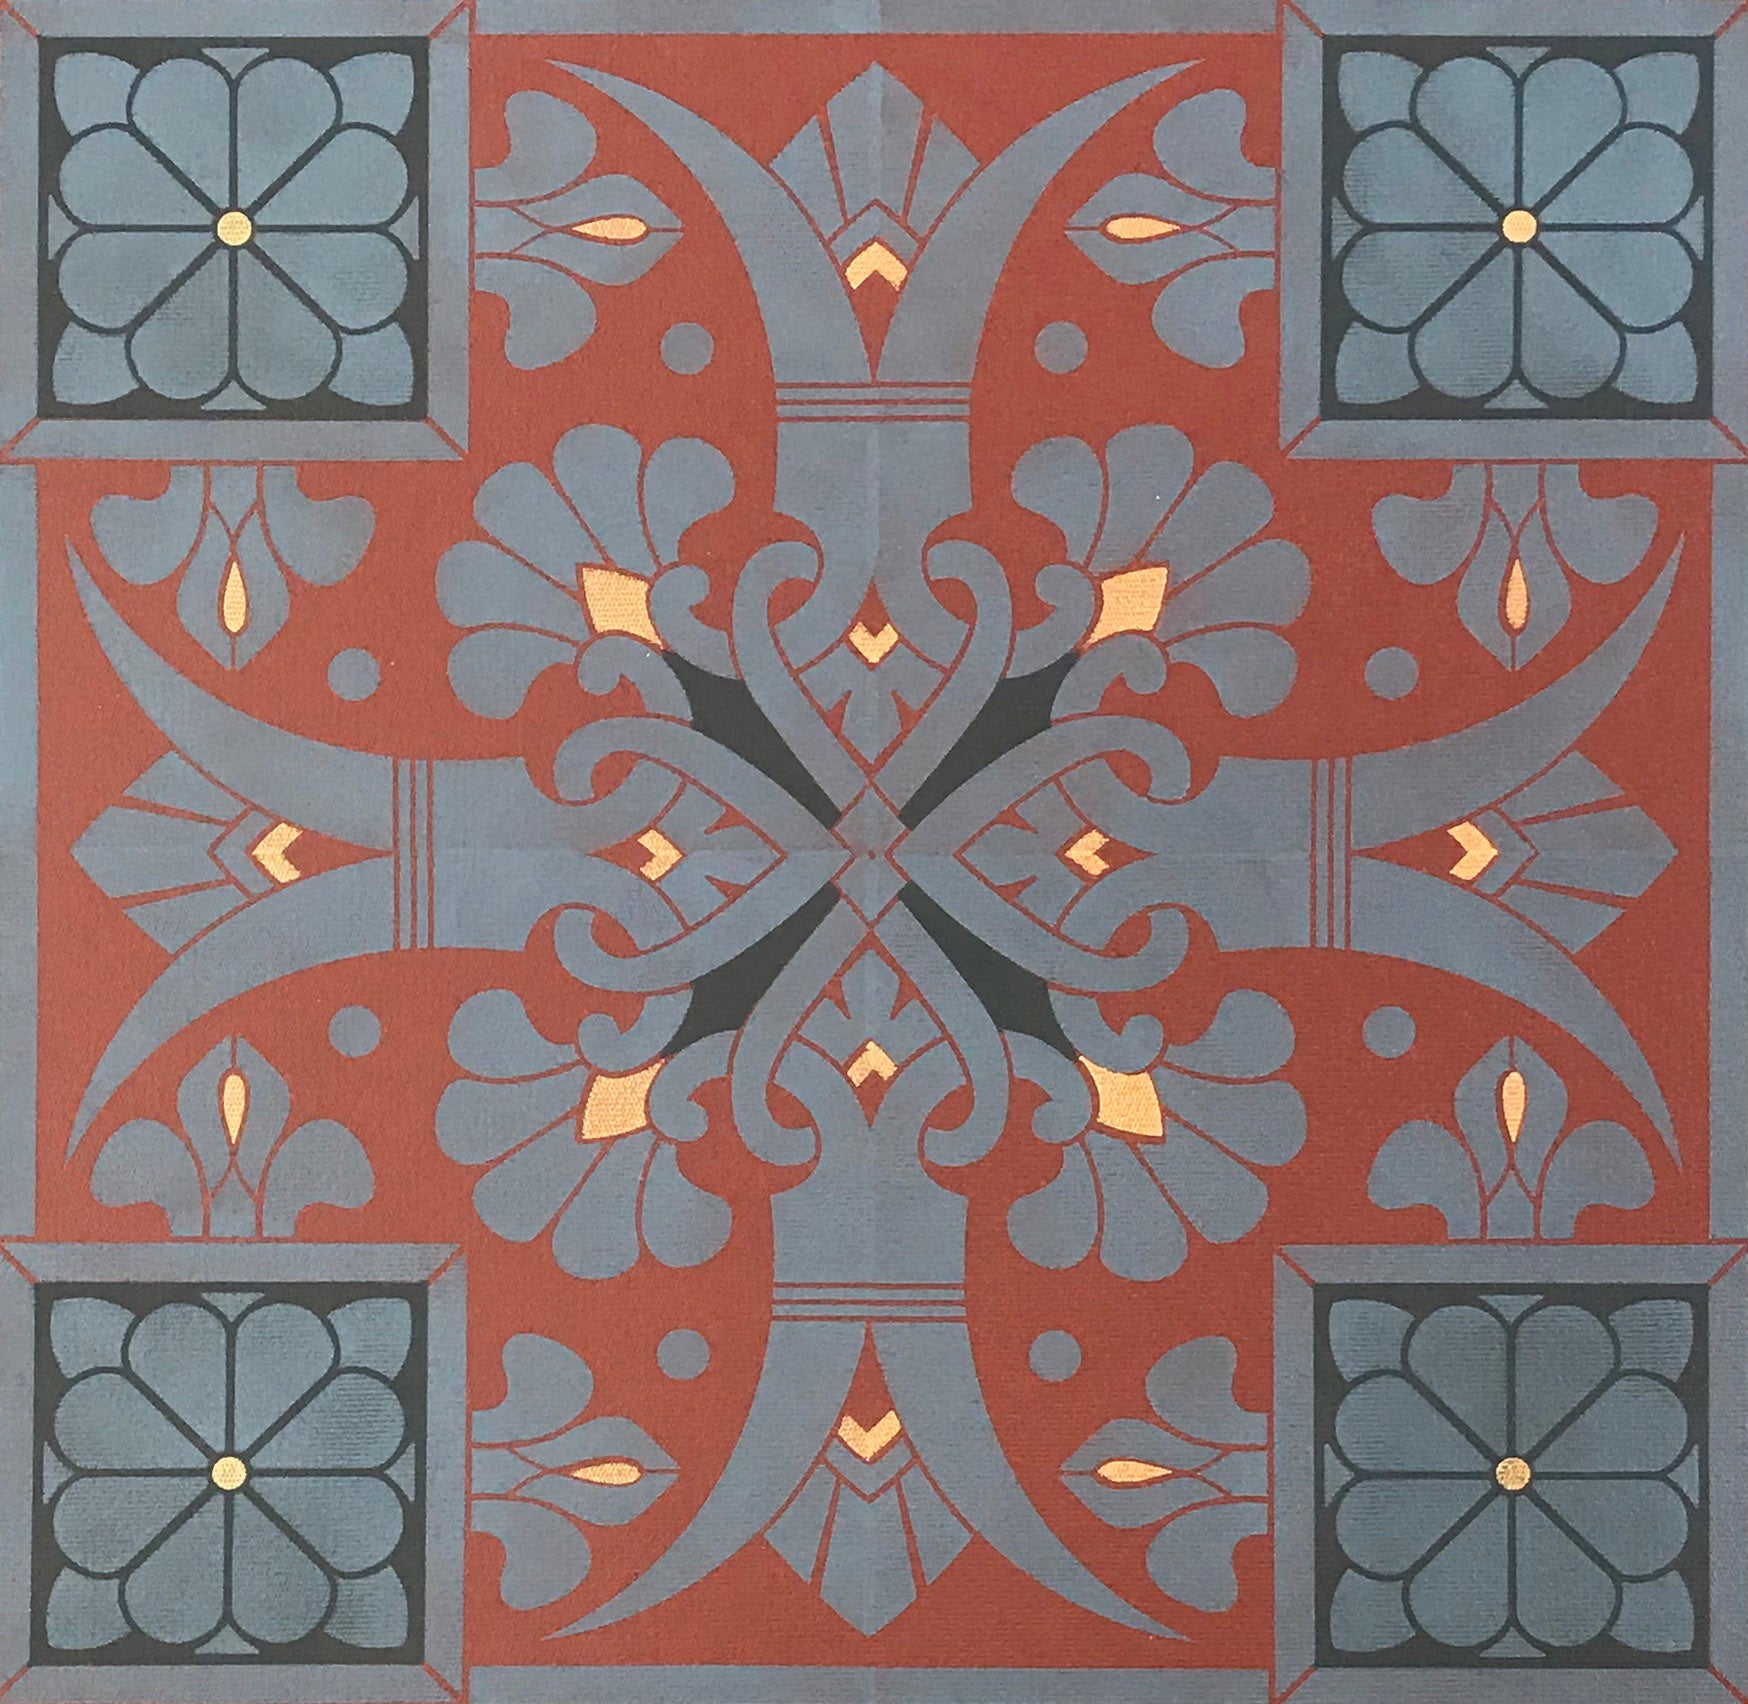 Close up of elements of this floorcloth including charming fleur de lis and floral motifs.